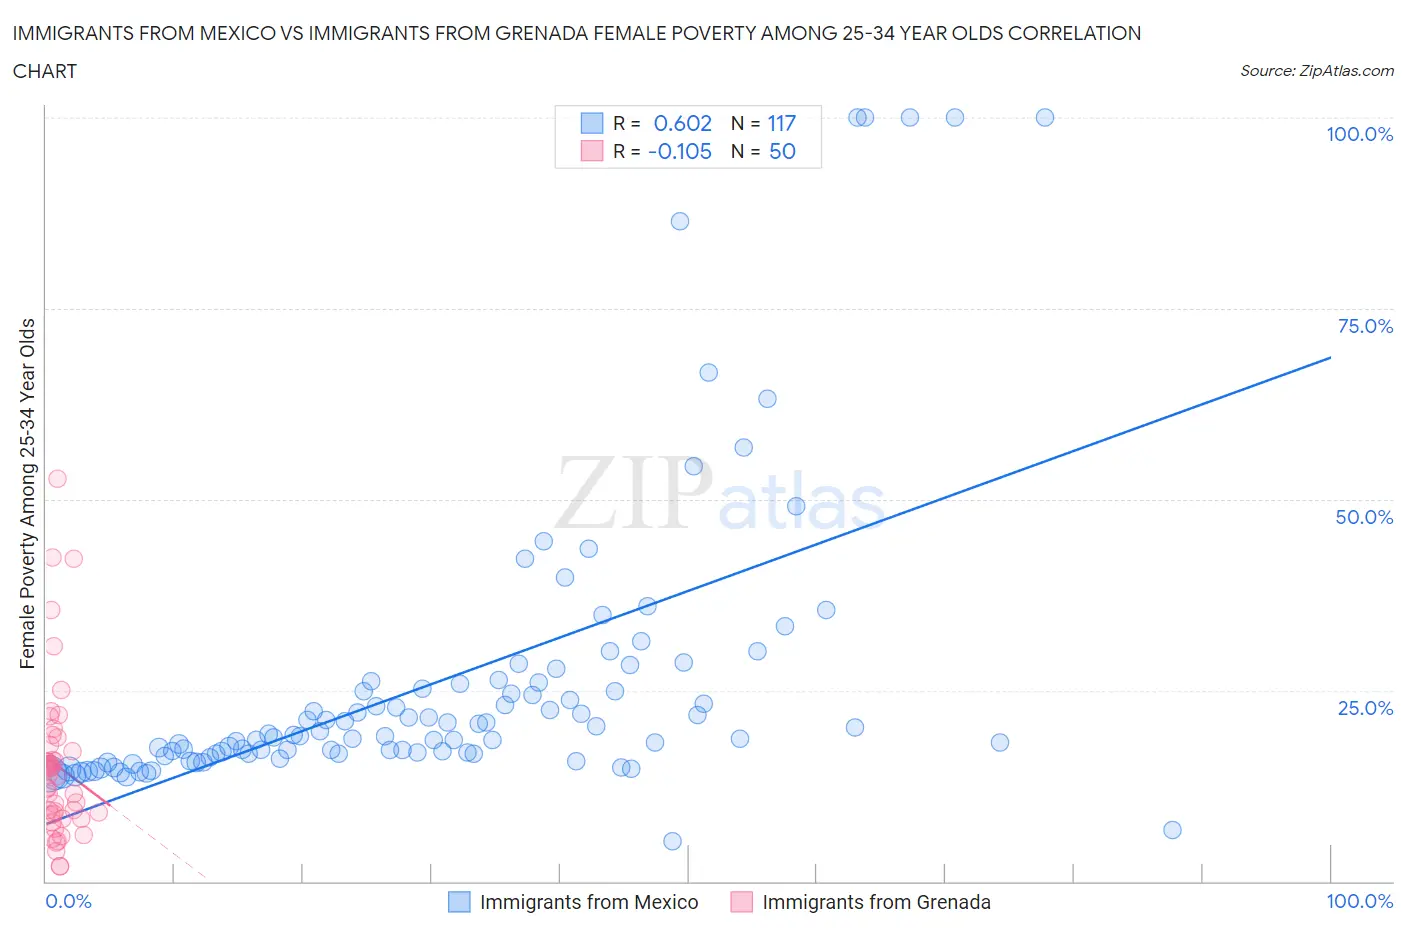 Immigrants from Mexico vs Immigrants from Grenada Female Poverty Among 25-34 Year Olds